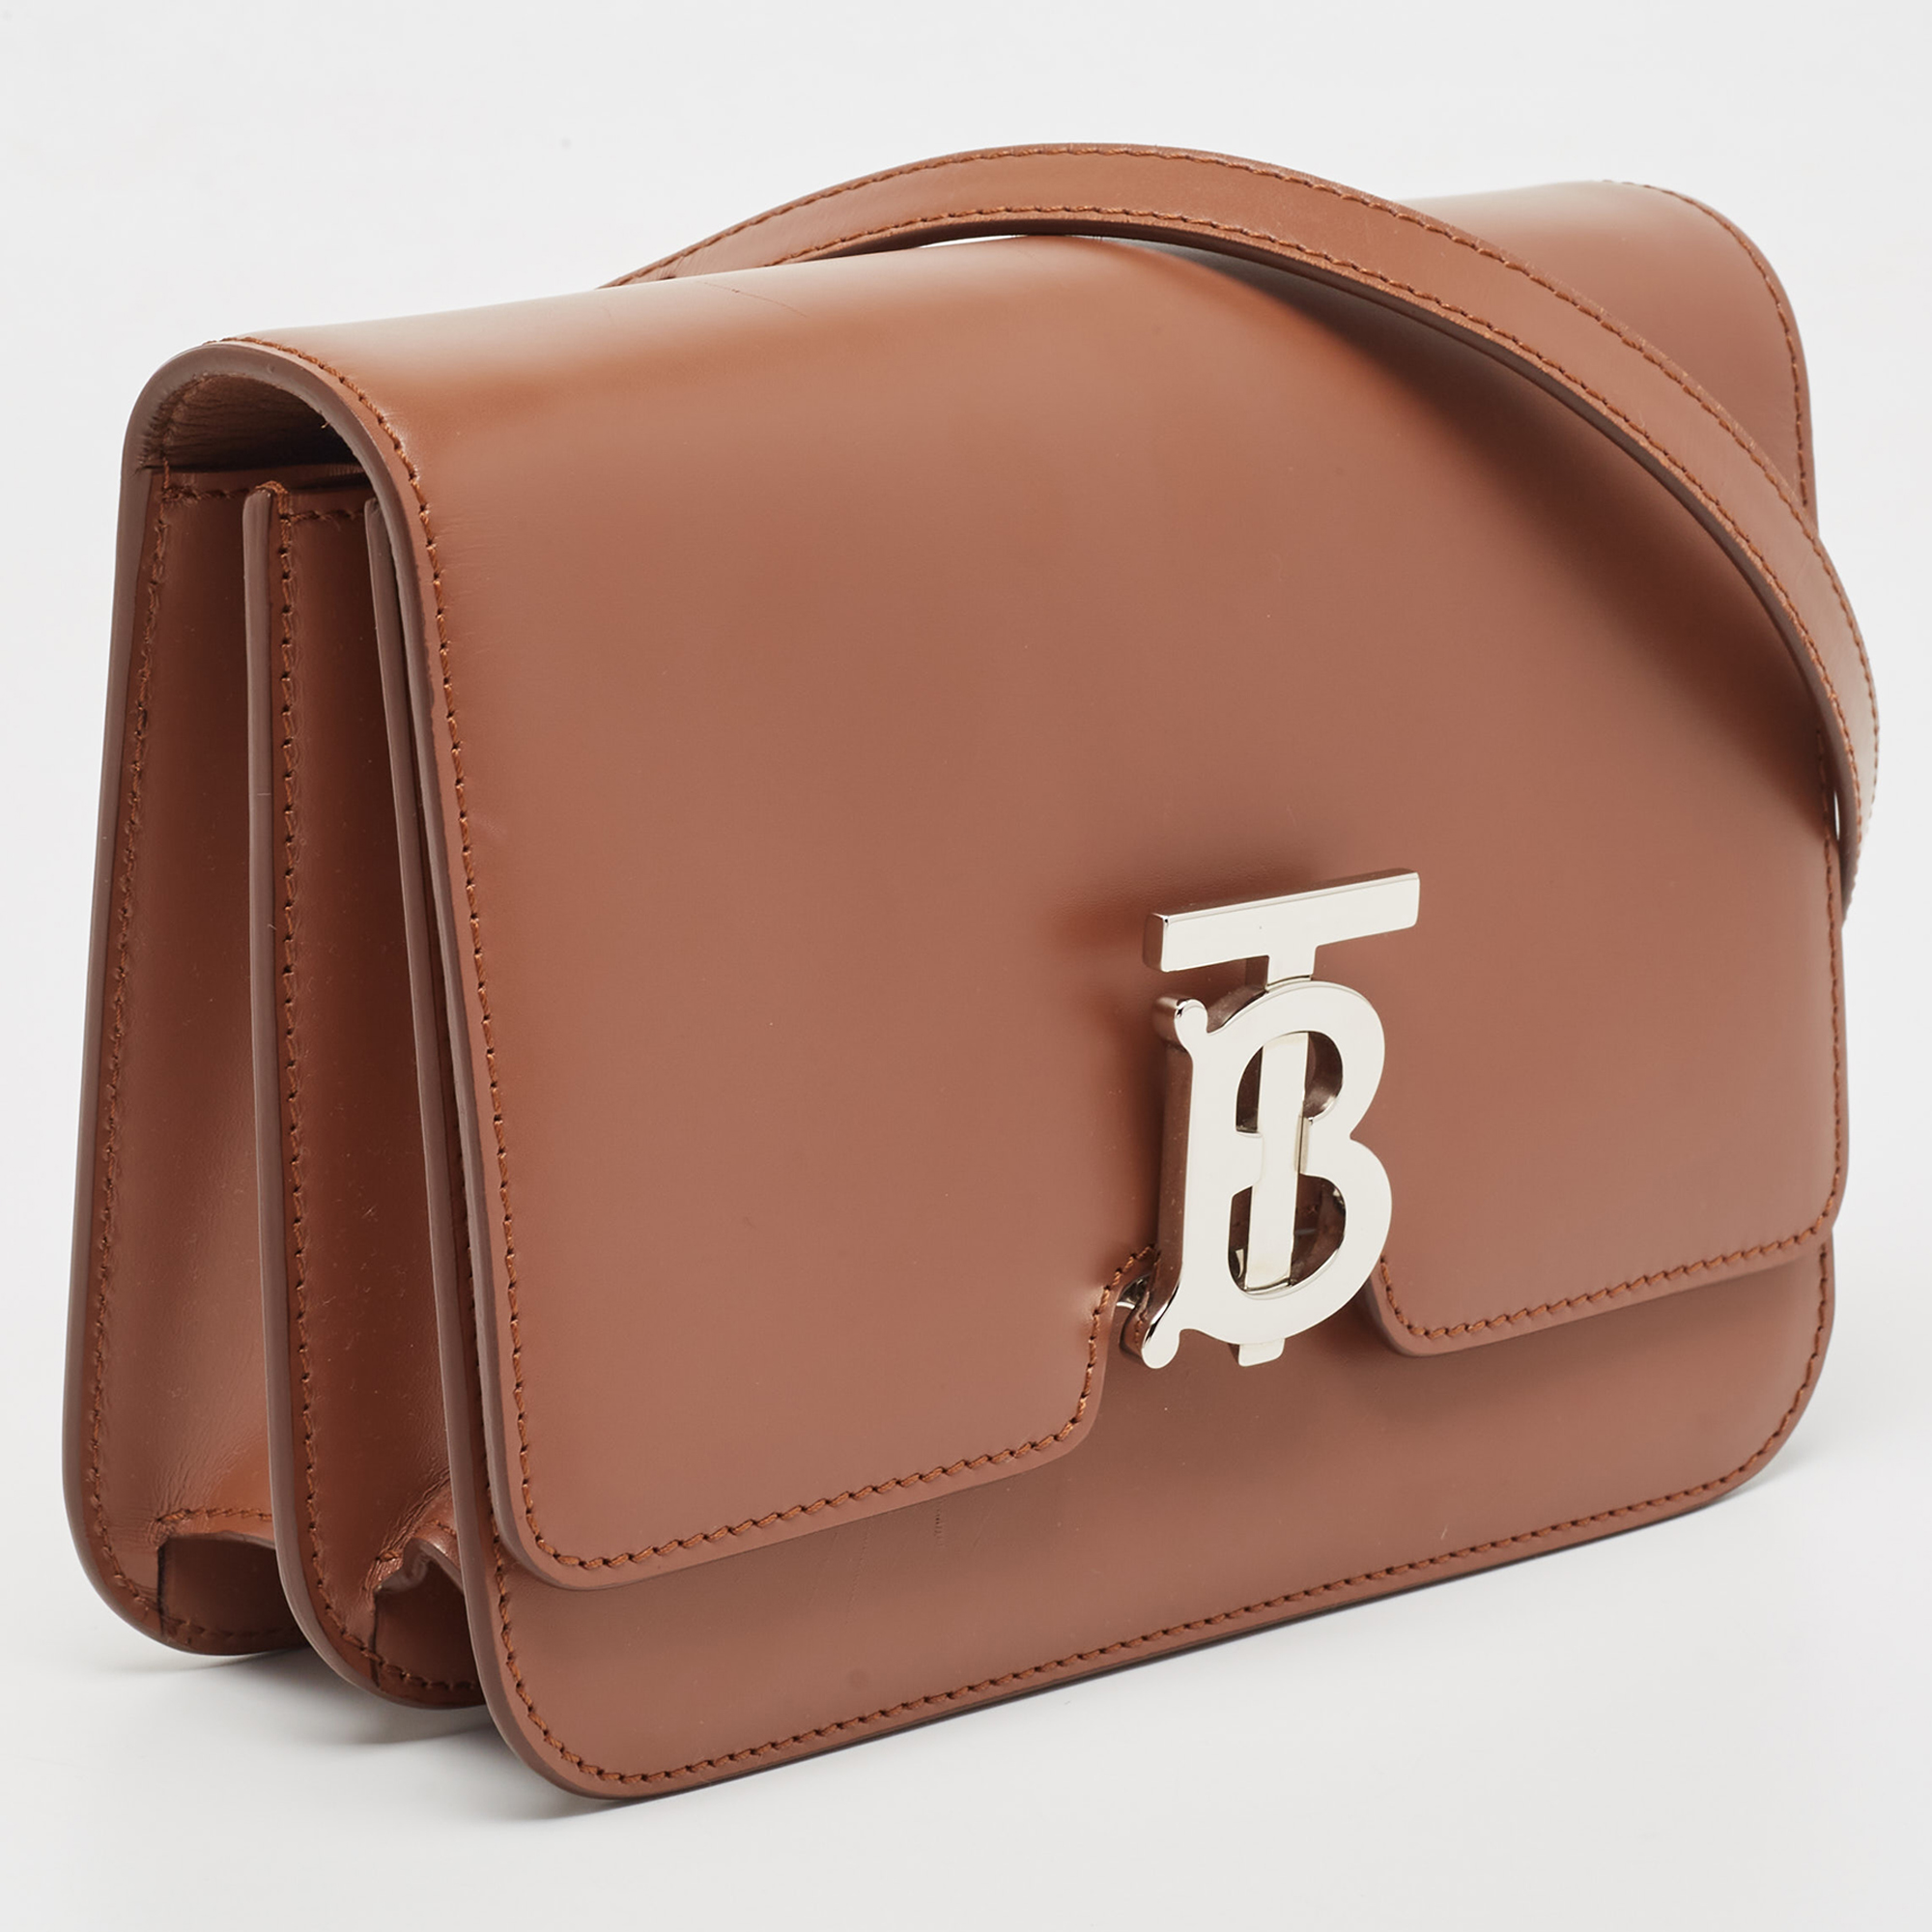 Burberry Brown Leather Small TB Shoulder Bag